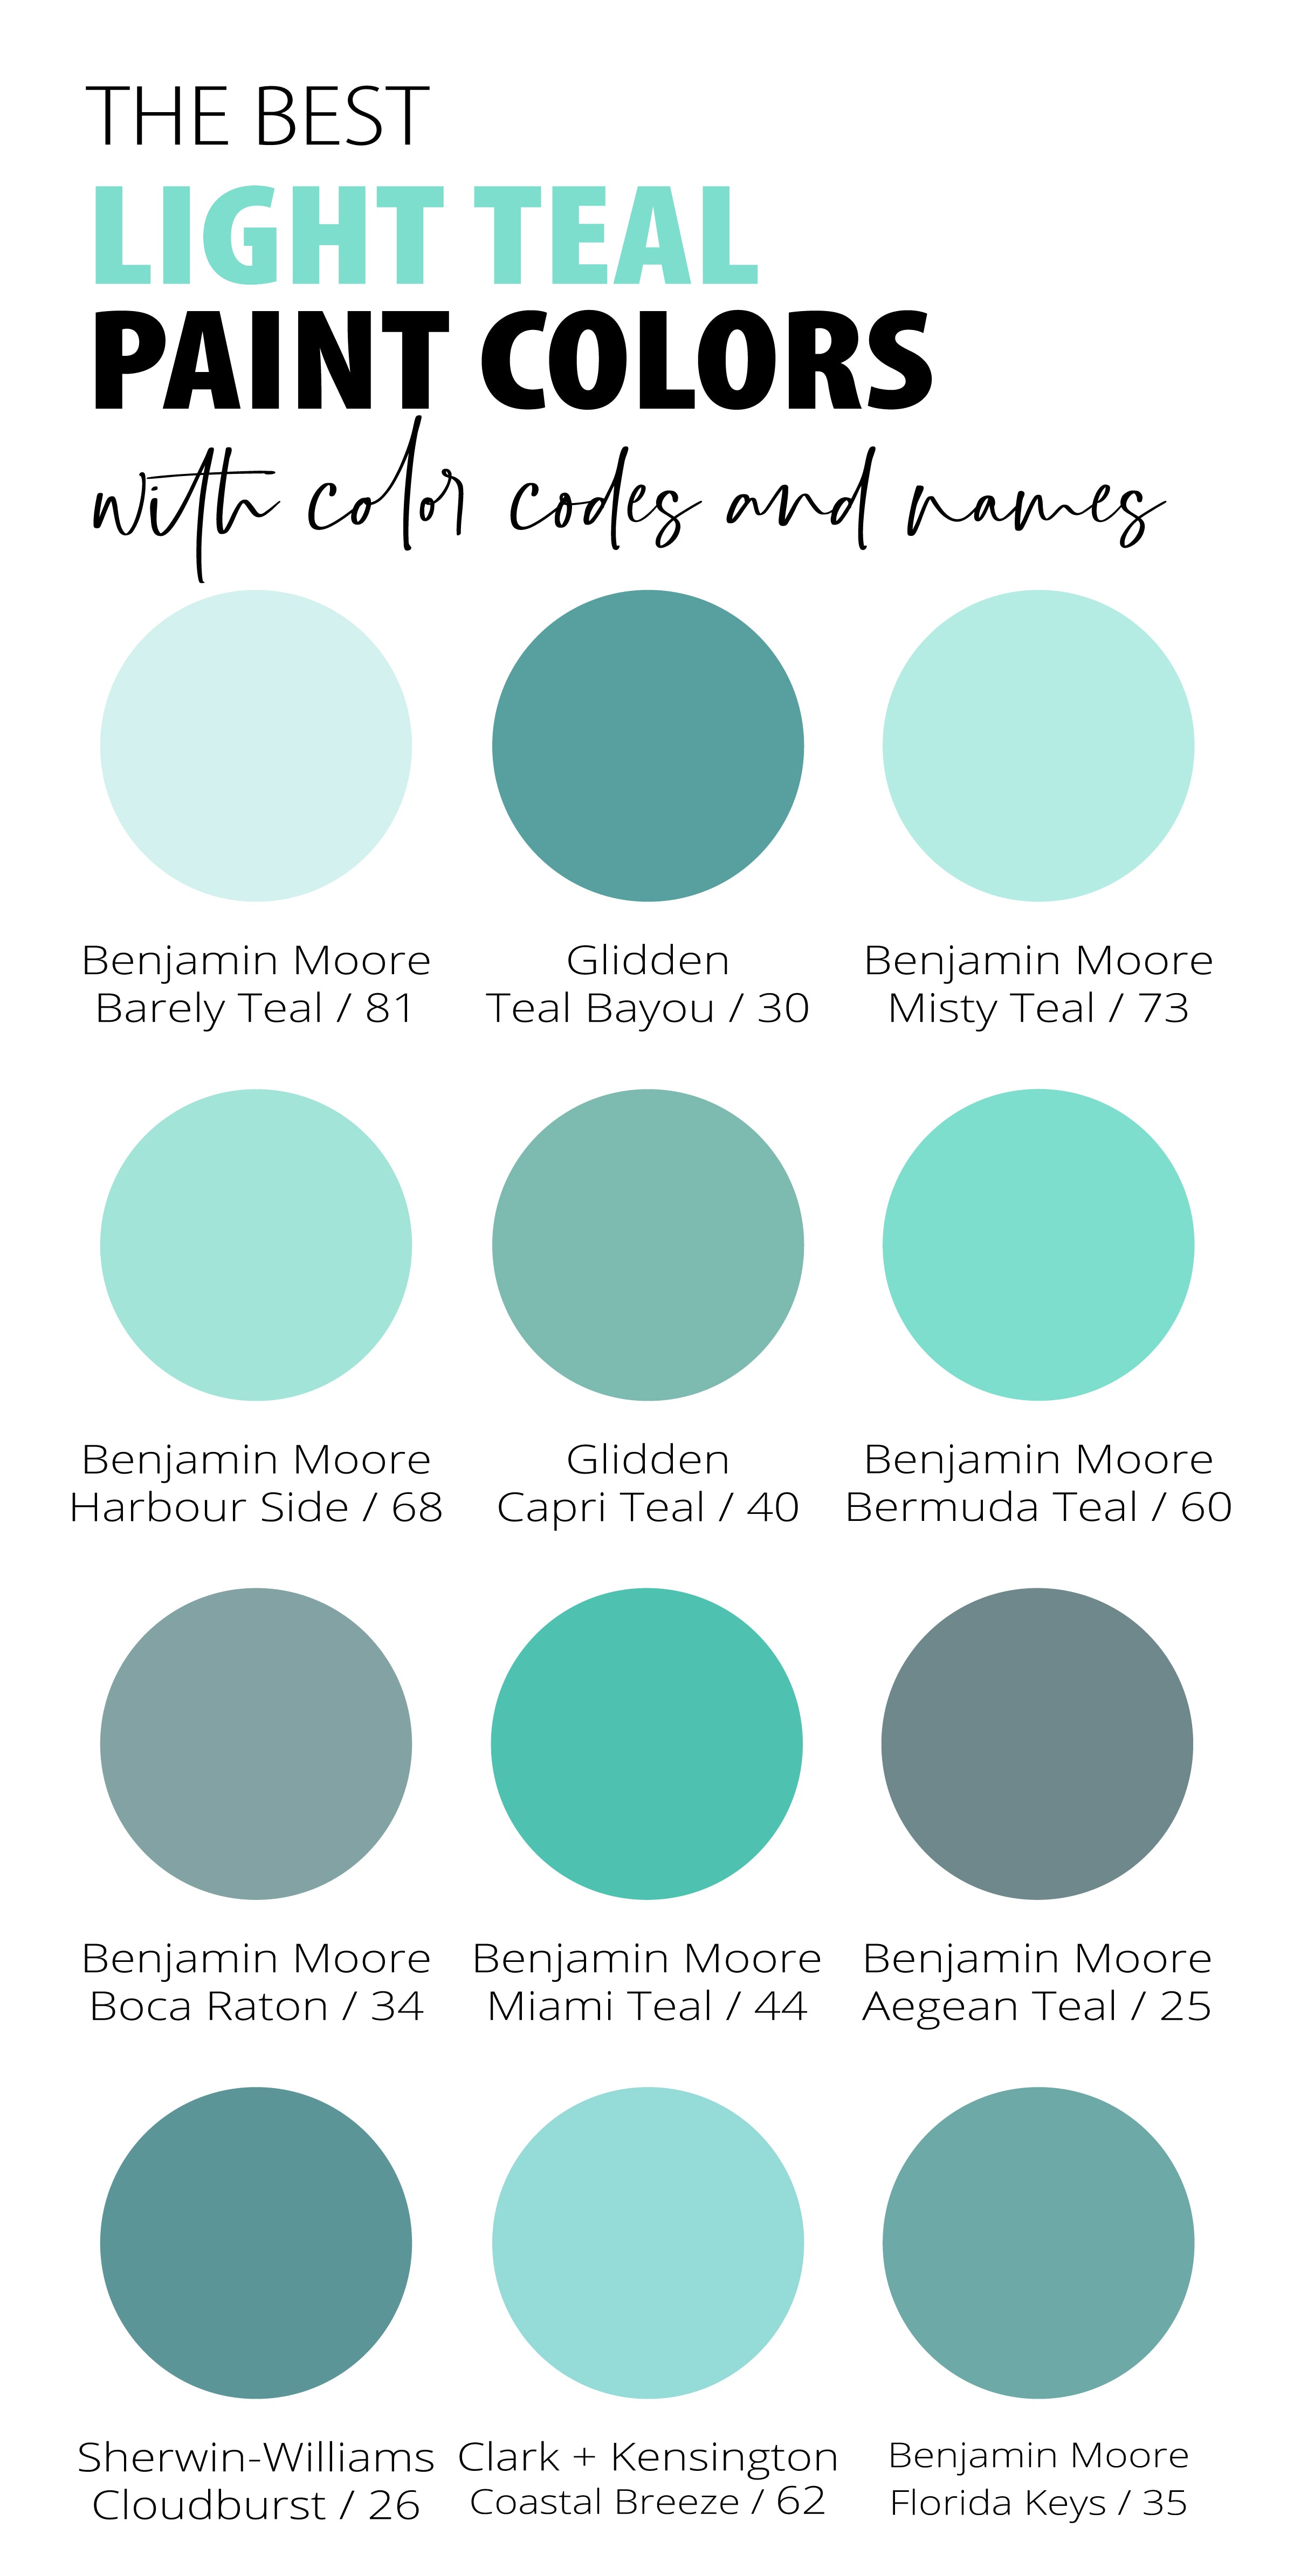 Best-Light-Teal-Paint-Colors-with-Names-Colors-and-LRV-Values